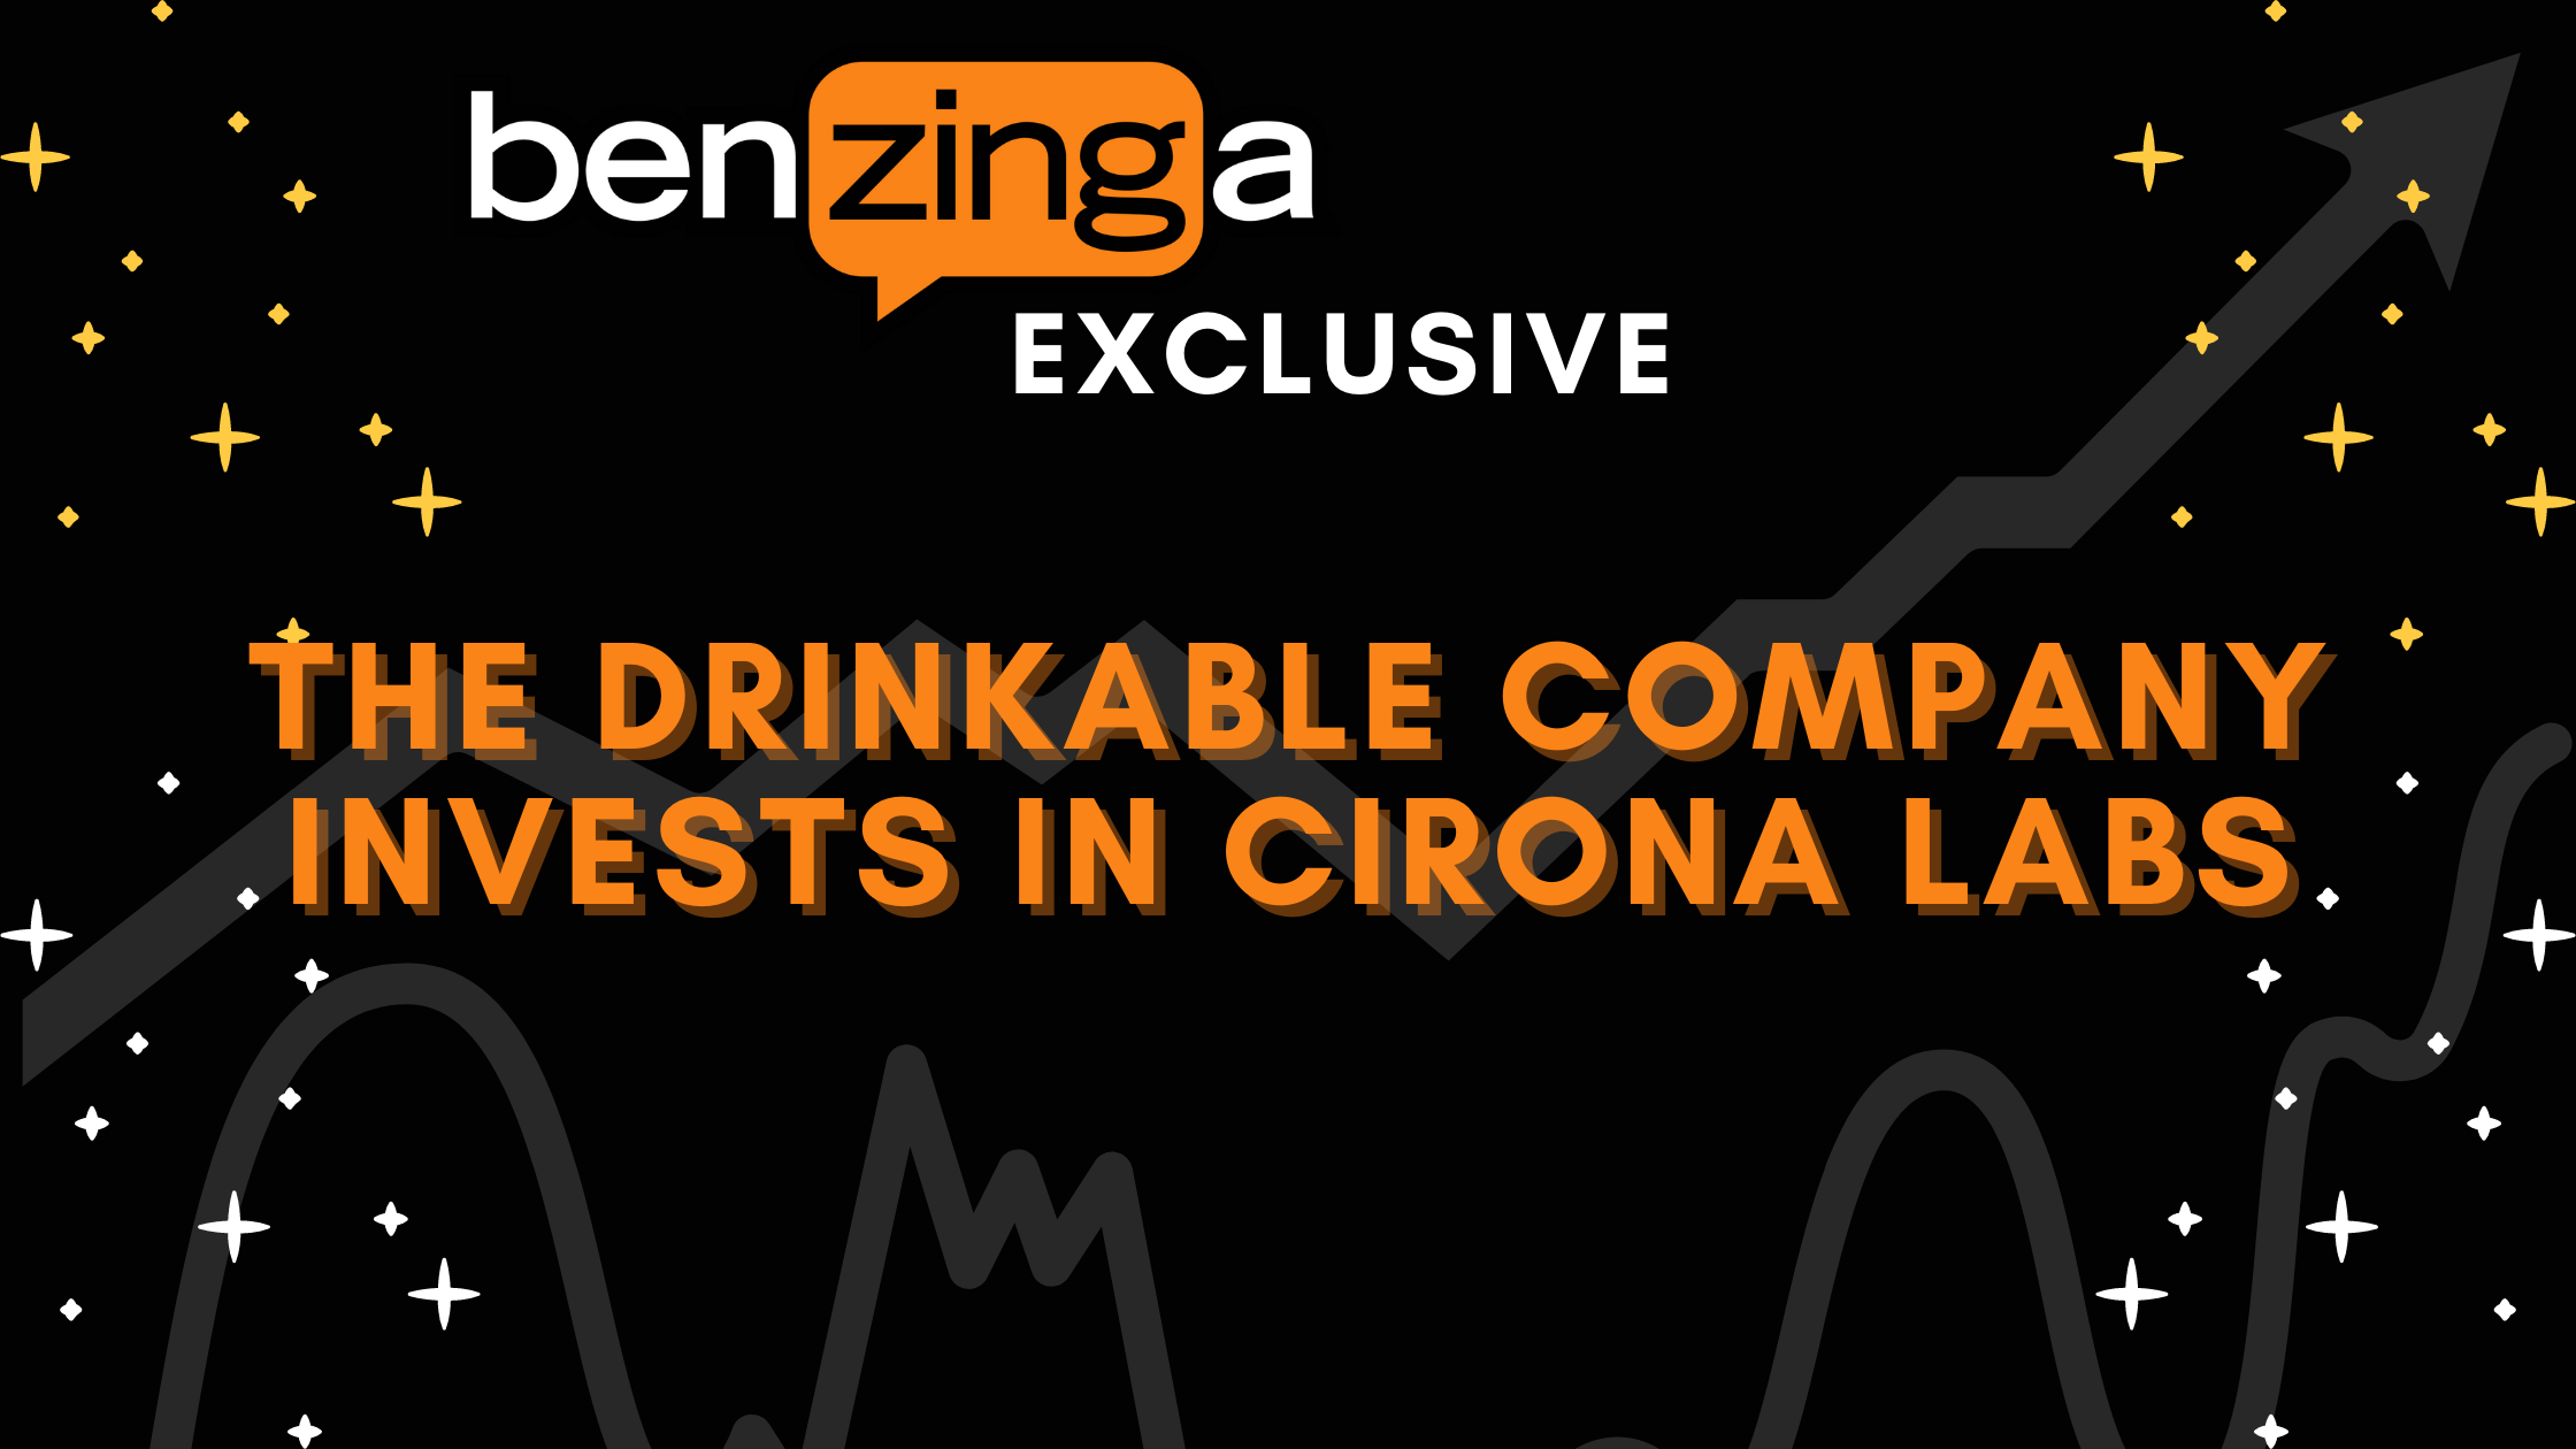 EXCLUSIVE: The Drinkable Company Invests in Cirona Labs, Forming Cannabinoid Beverage R&amp;D Partnership